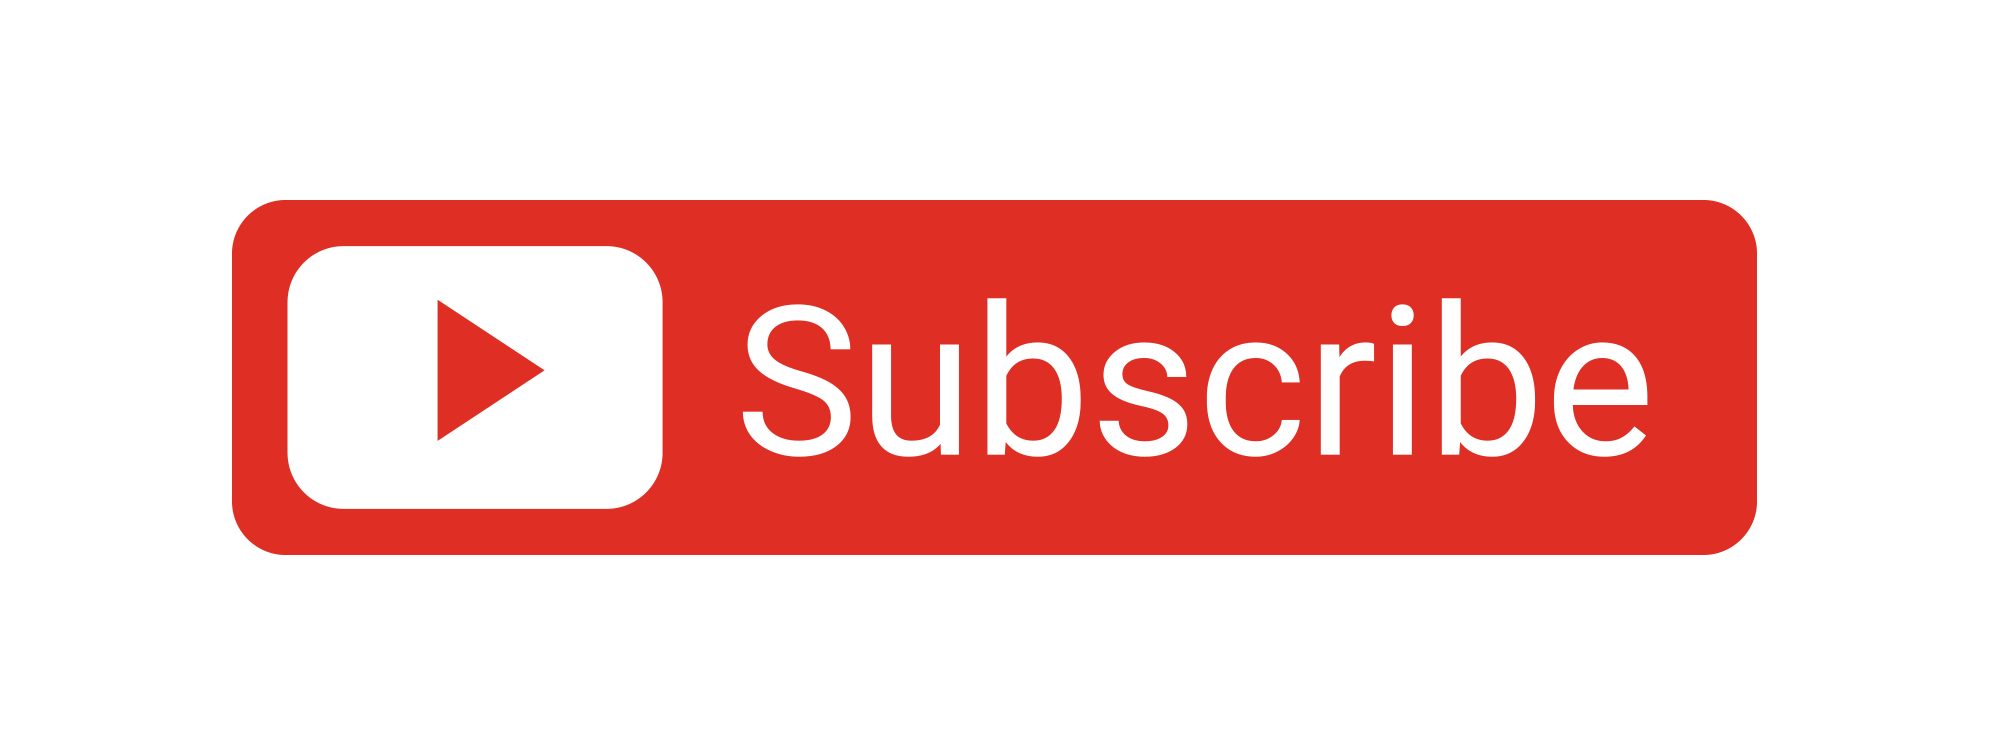 Youtube Subscribe Button Png Transparent Image Png Arts Images And